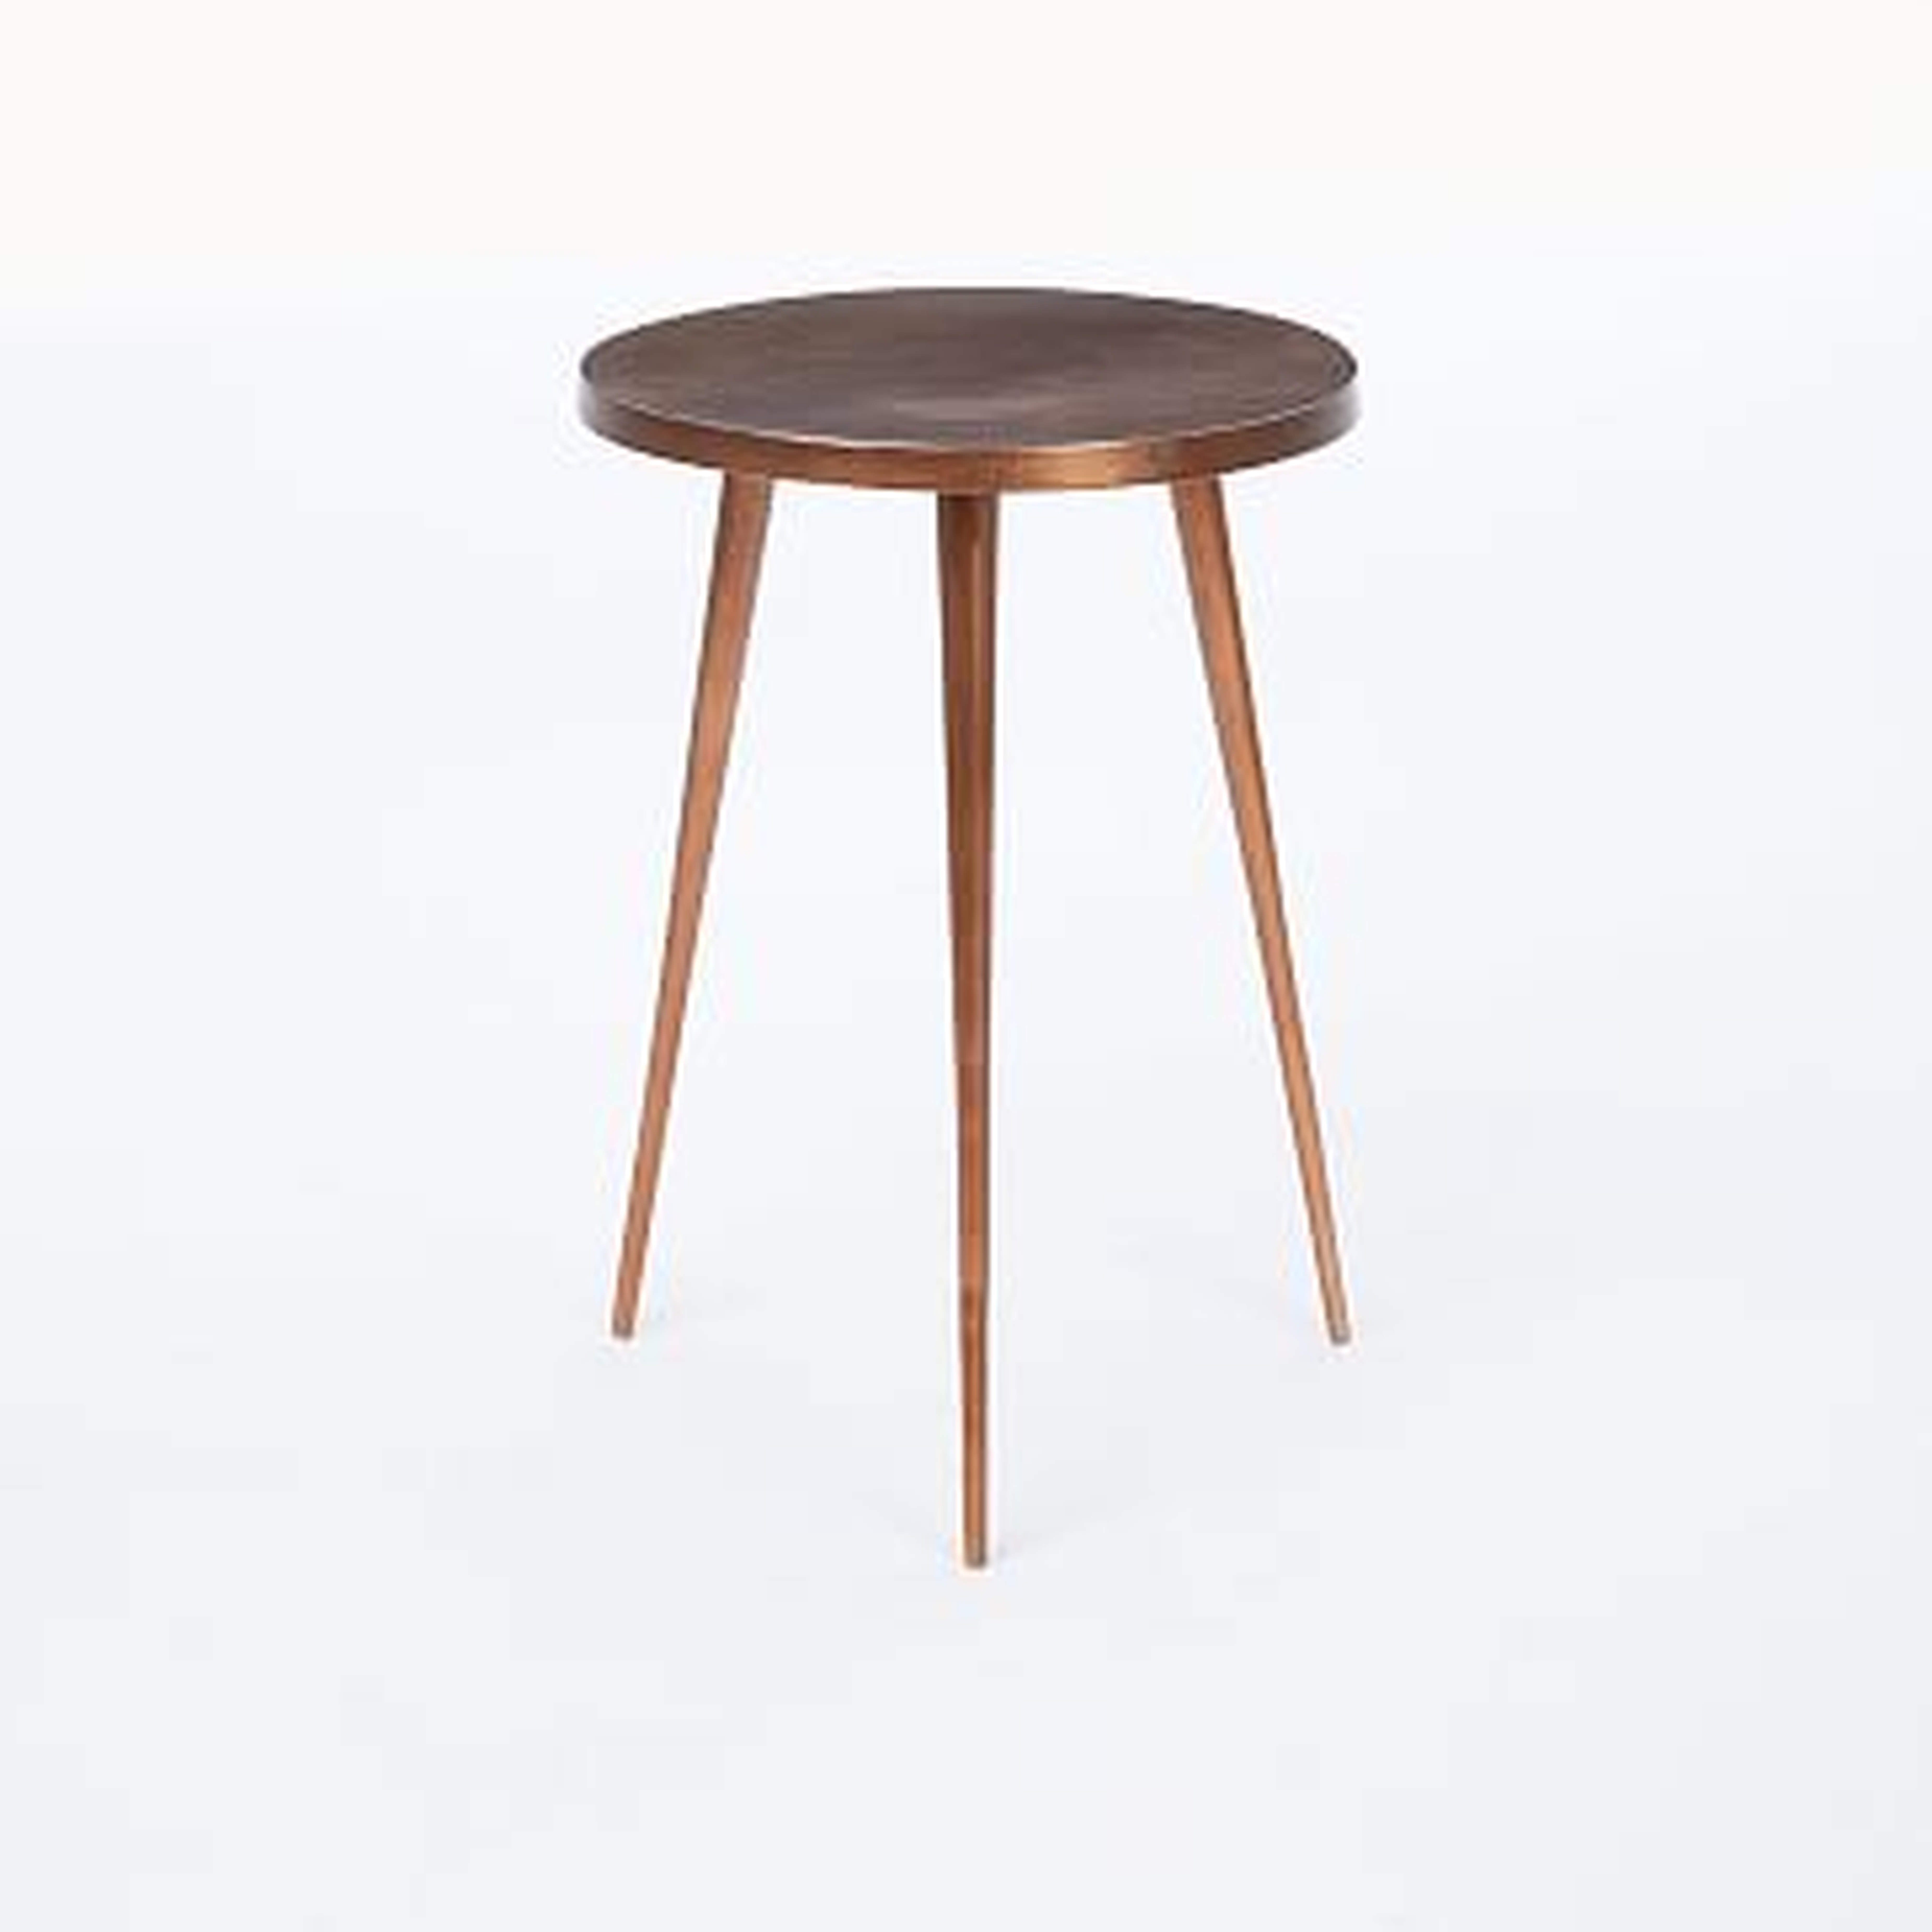 DISCONTINUED Tripod Side Table, Copper - West Elm